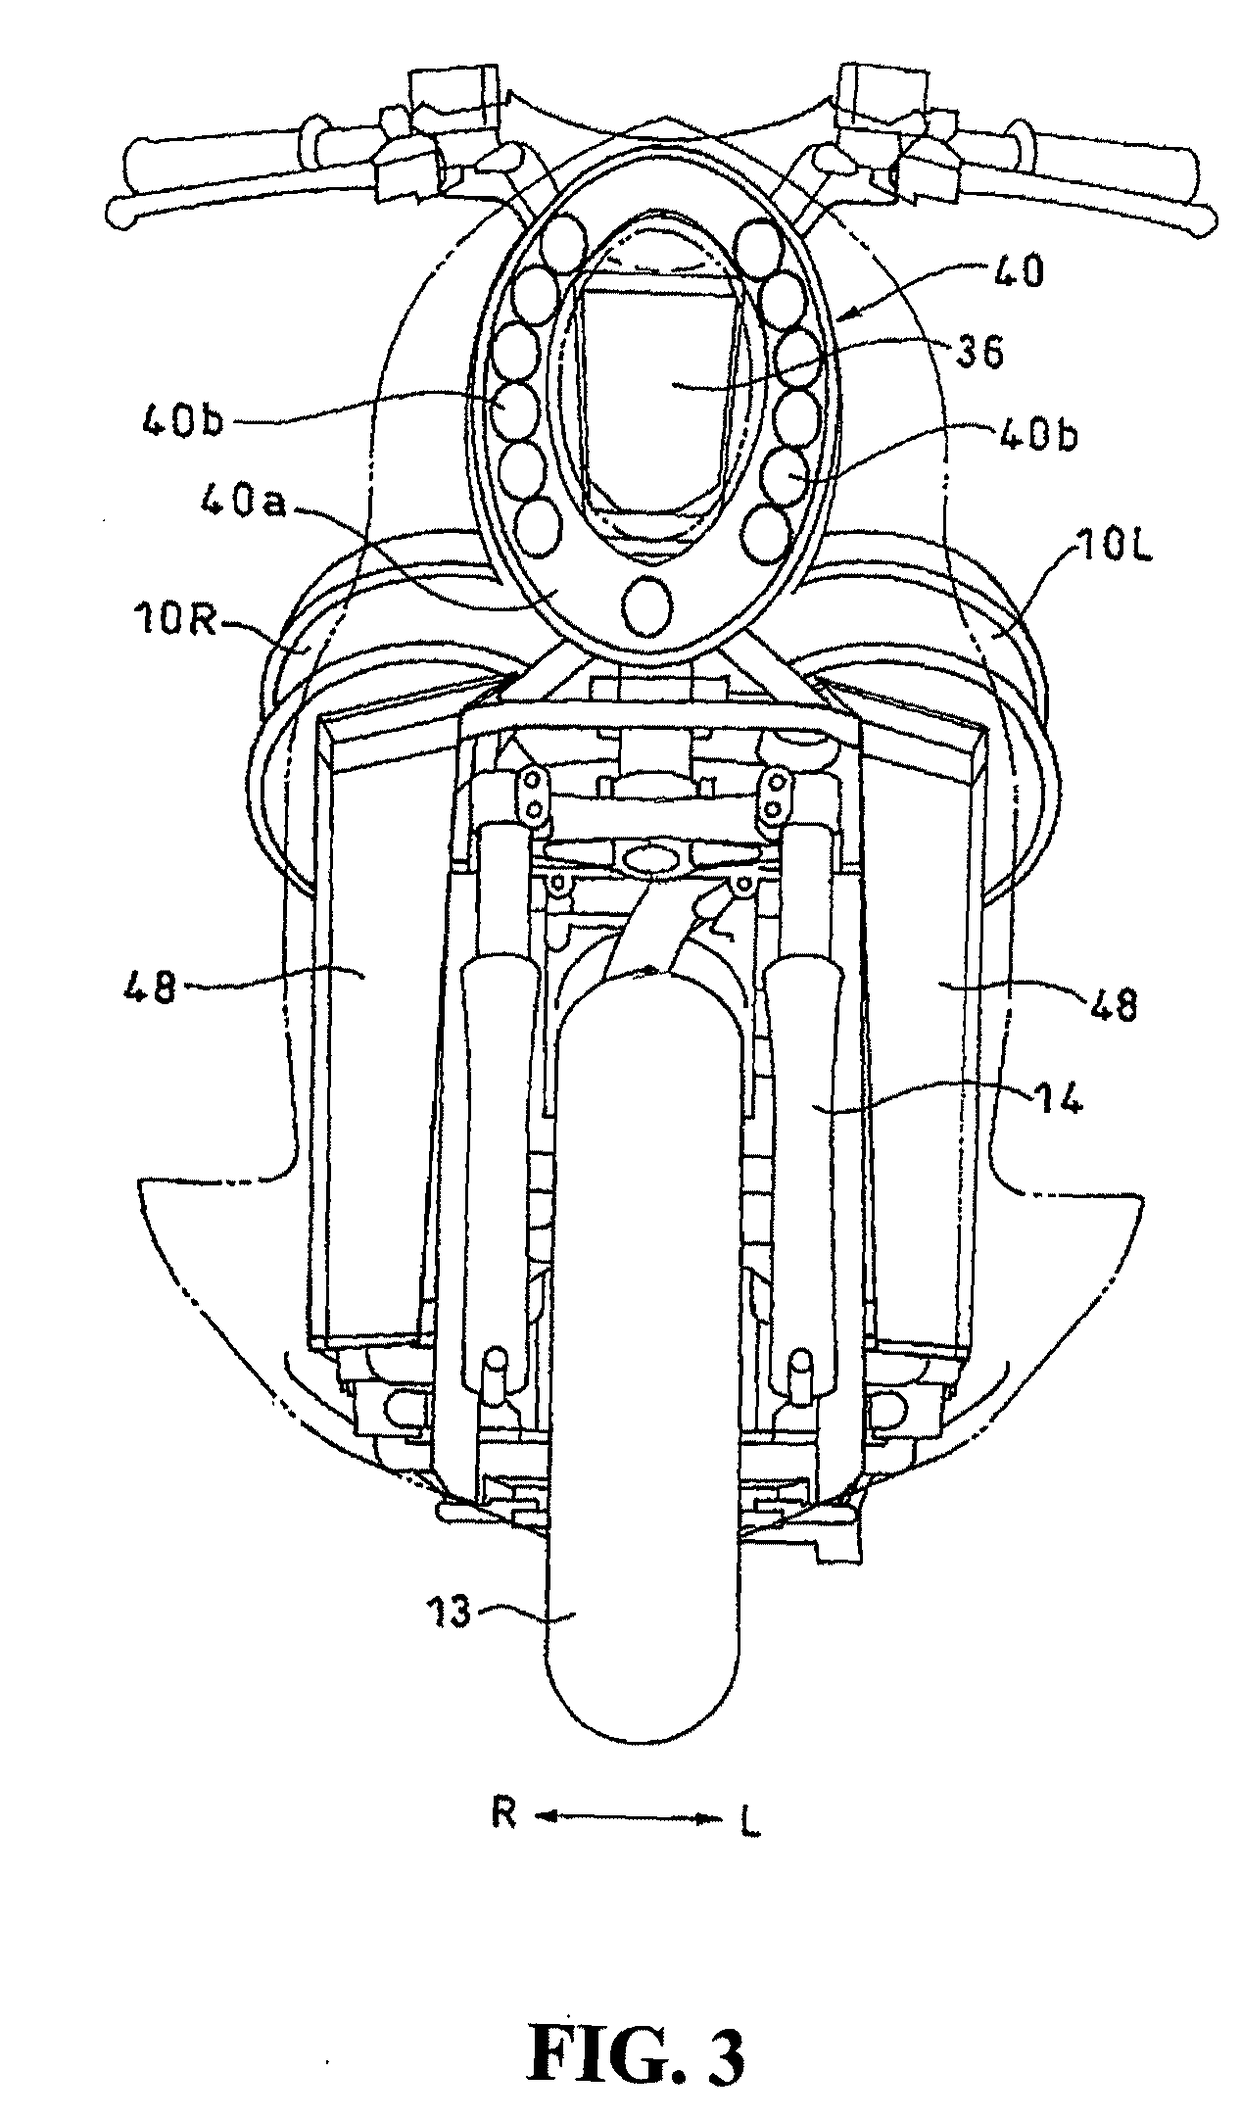 Drainage structure in fuel cell motorcycle